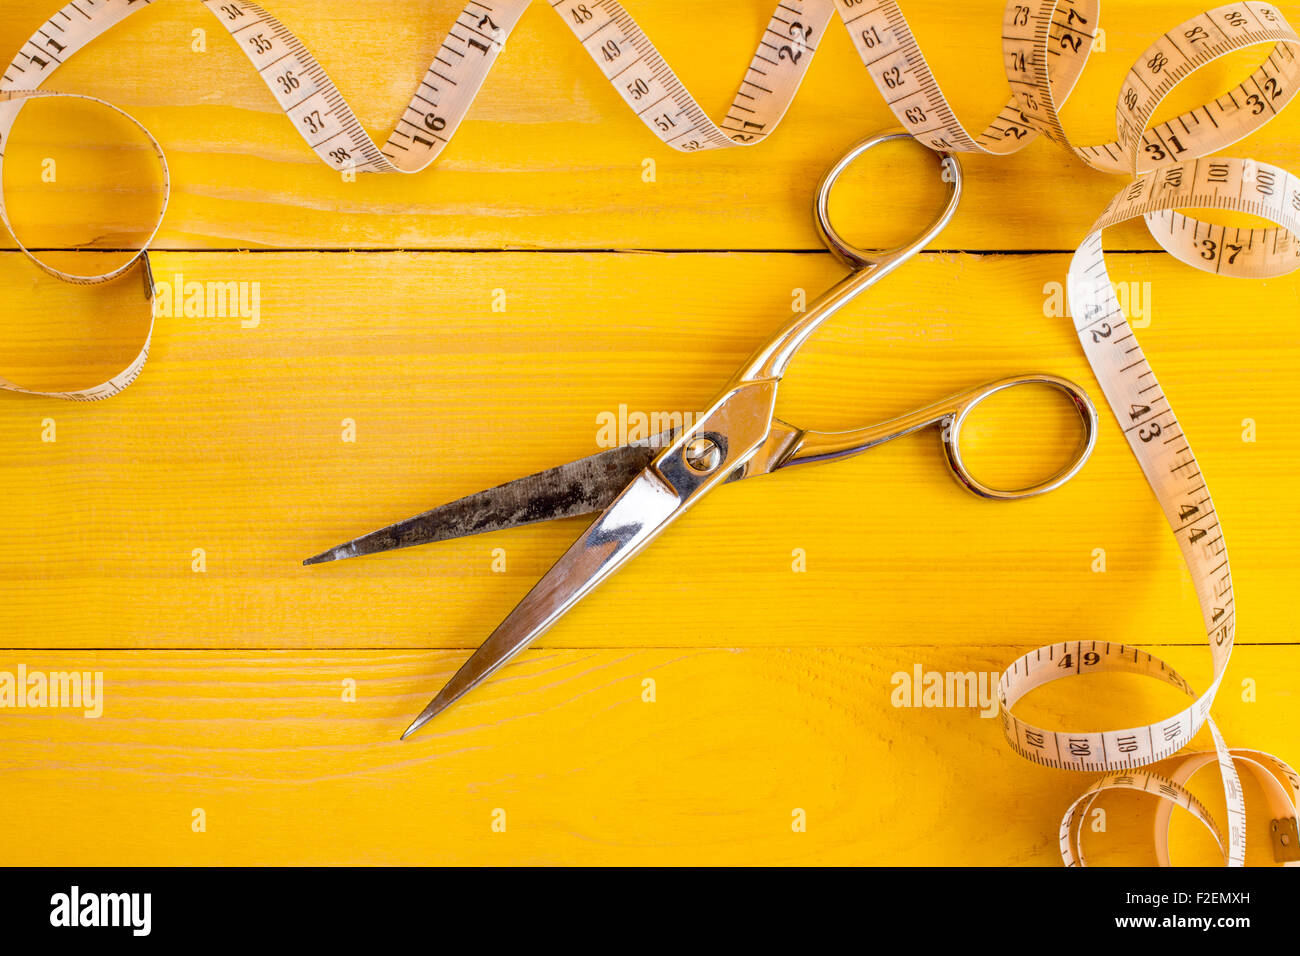 Metal scissors and measure tape on yellow background. Fashion industry concept. Stock Photo